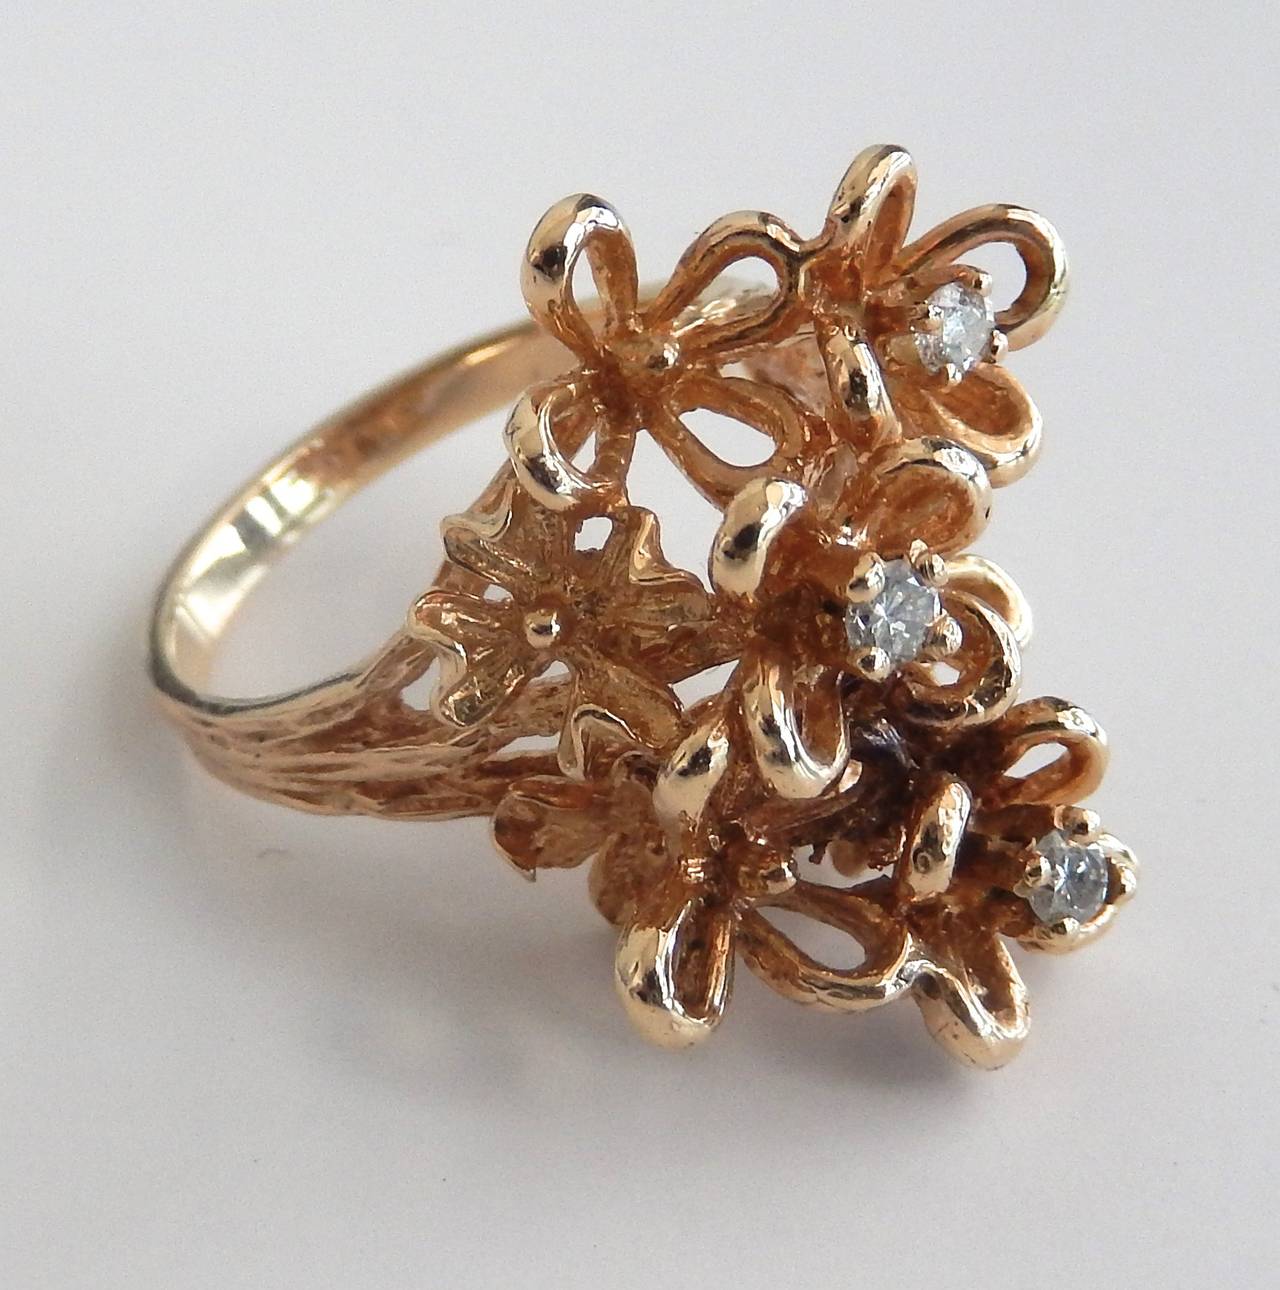 A sculptural ring of three diamonds and 14K textured gold with a stylized floral motif setting.  A graceful and lively design.  Ring size:  7